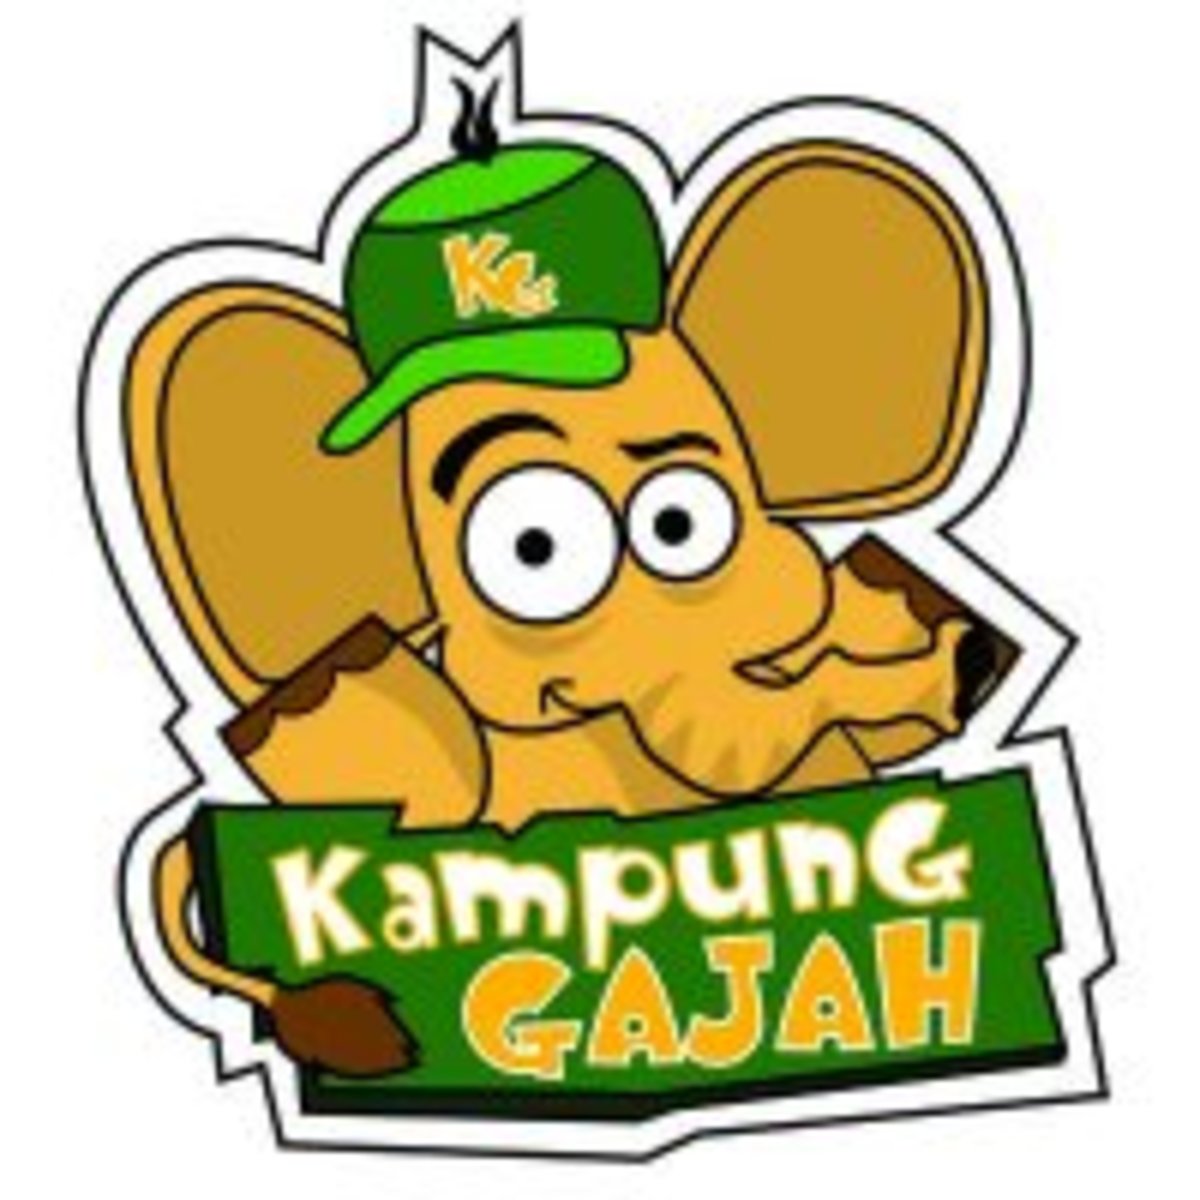 Kampung Gajah A New Attraction in Bandung West Java Indonesia